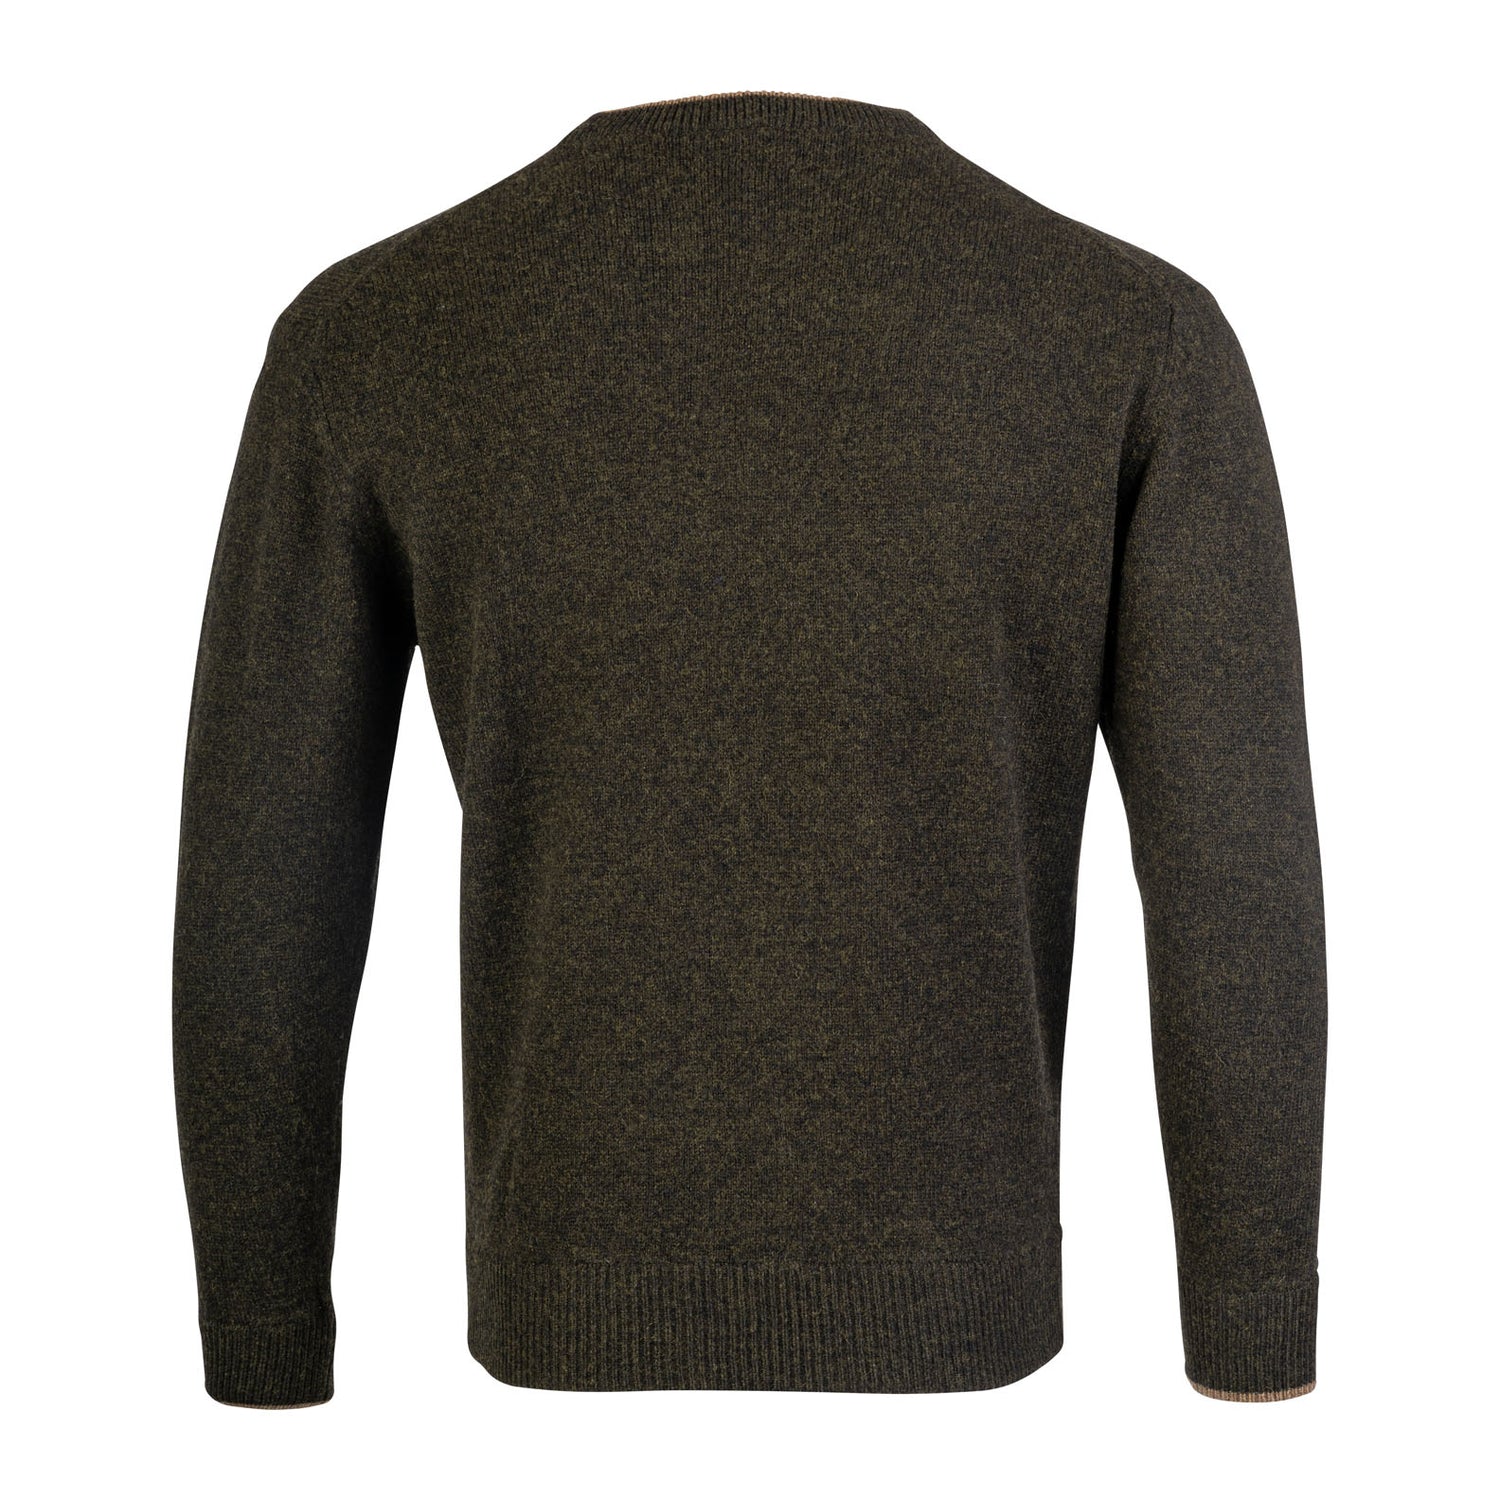 Jack Pyke Ashcombe 100% Lambswool Crewknit Pullover